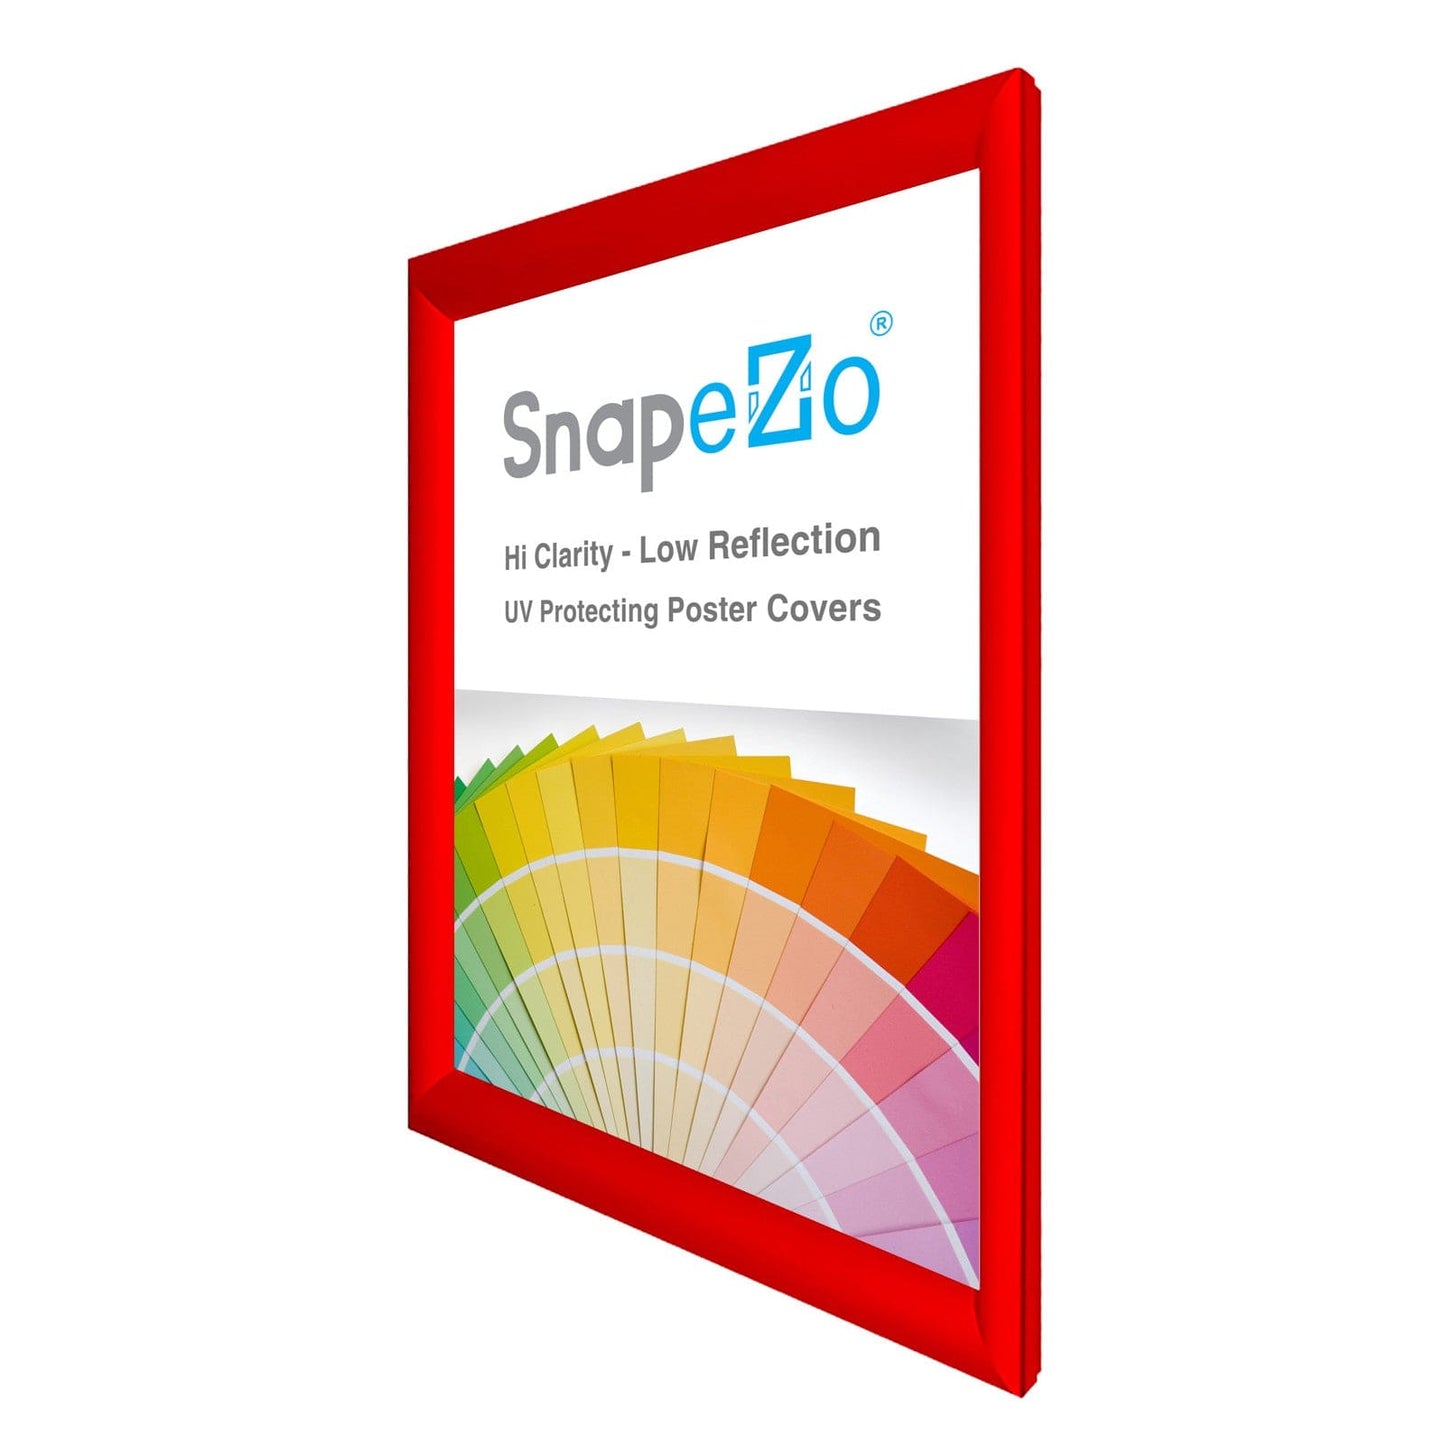 28x40 Red SnapeZo® Snap Frame - 1.2" Profile - Snap Frames Direct